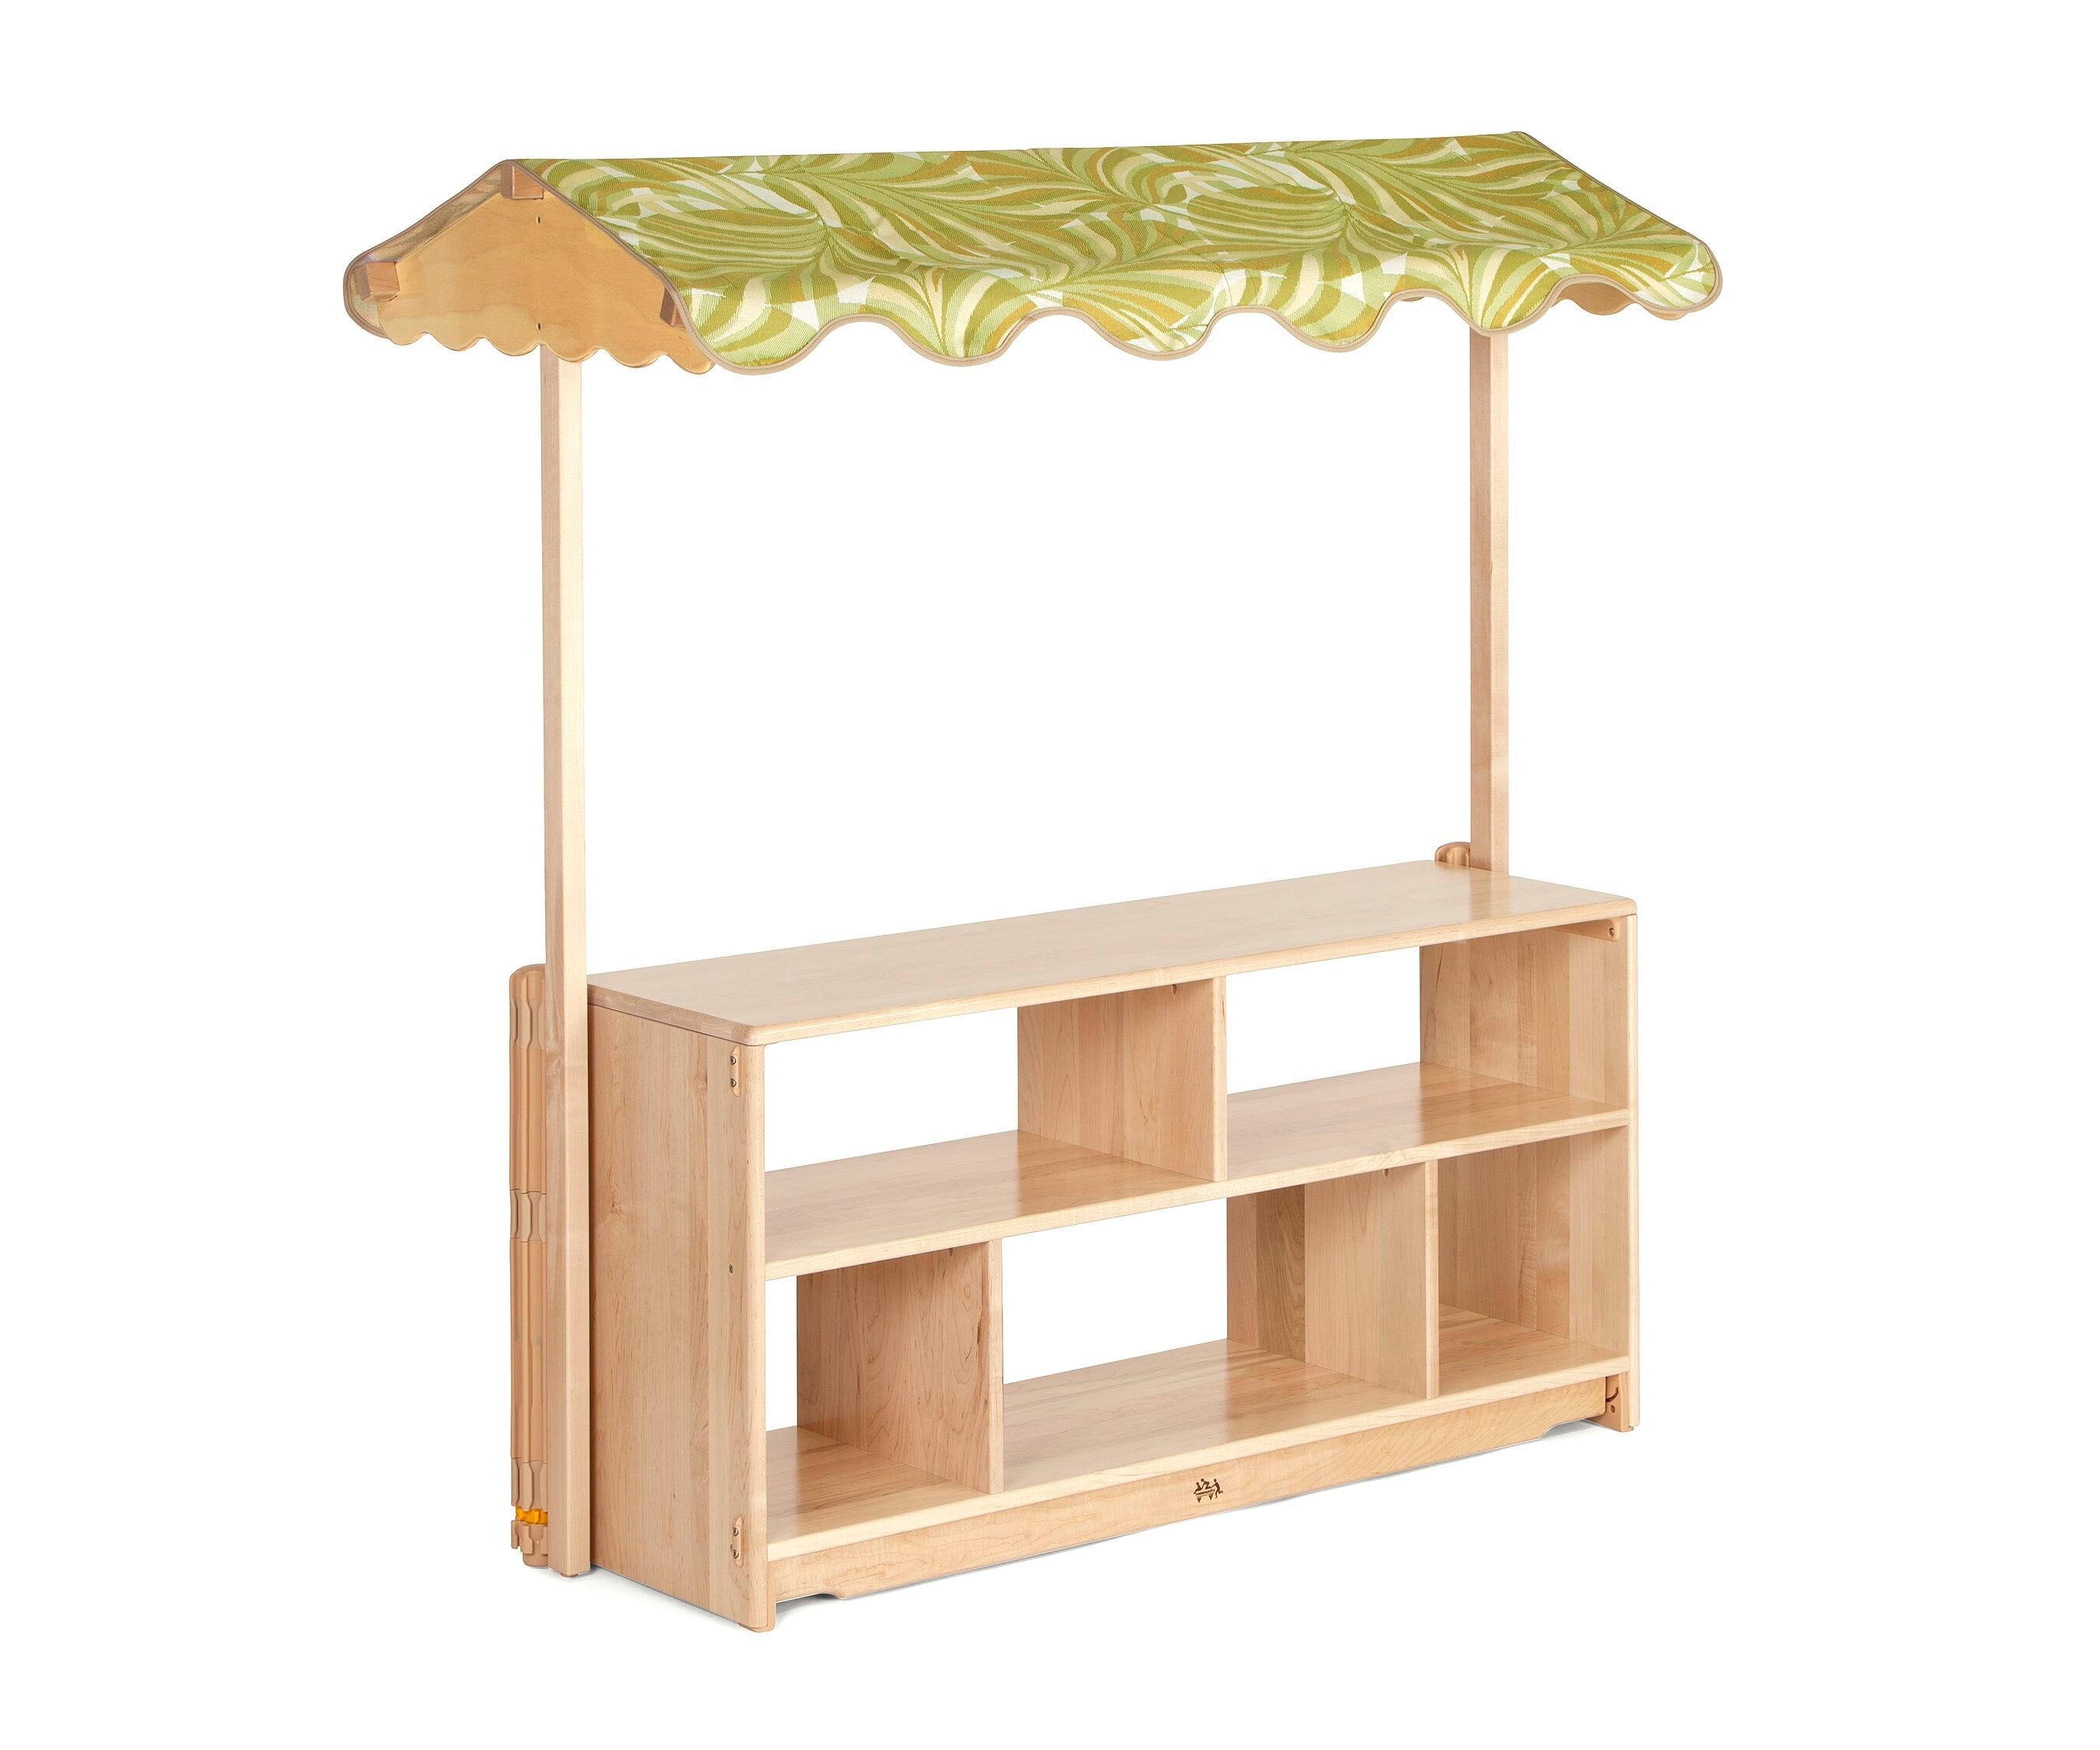 Community Playthings Canopy Unit Furnishings Community Playthings for child care day care primary classrooms